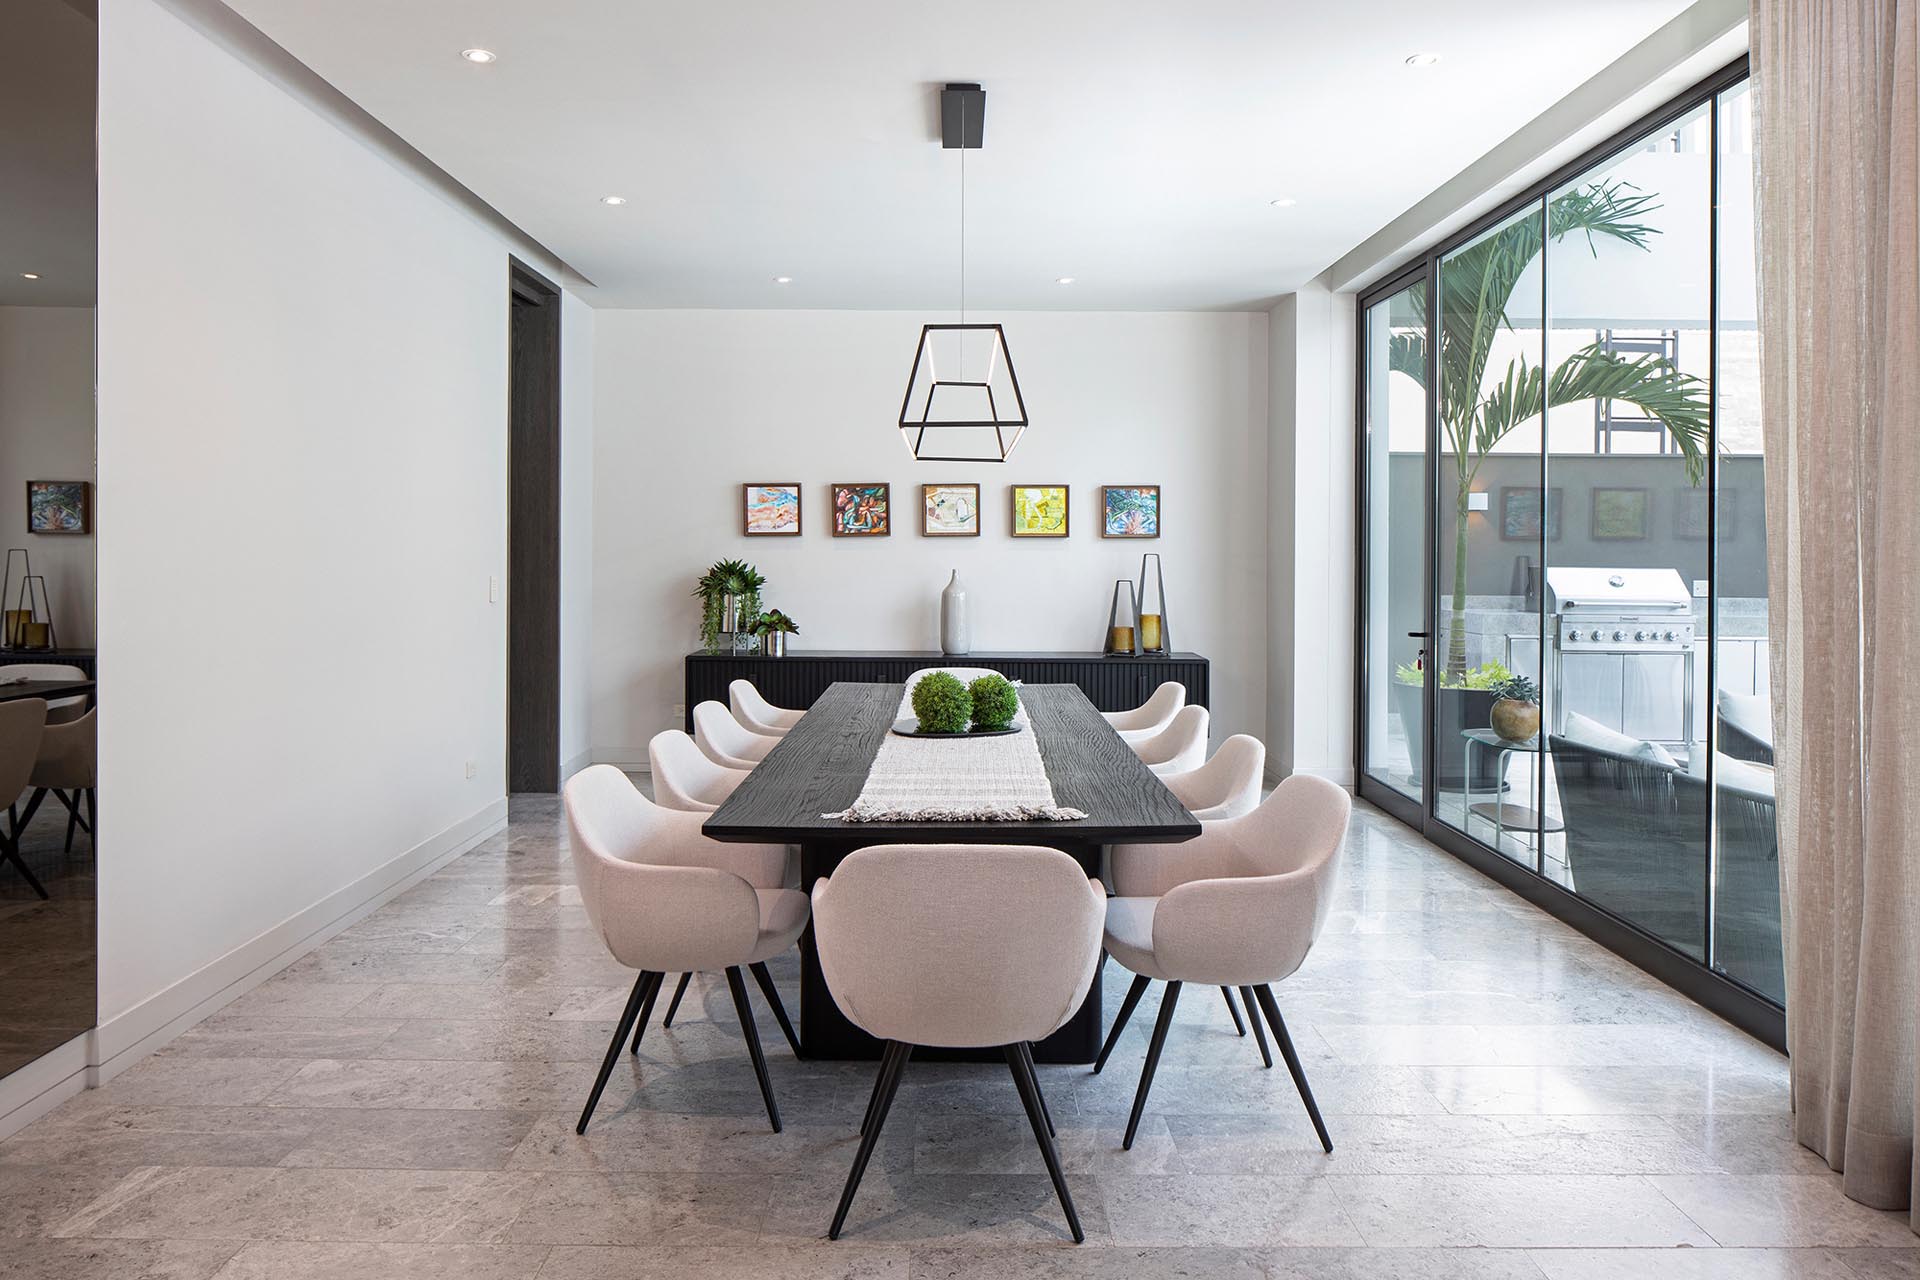 Natural stone flooring can be found on the ground level of this modern home, like in the dining room.